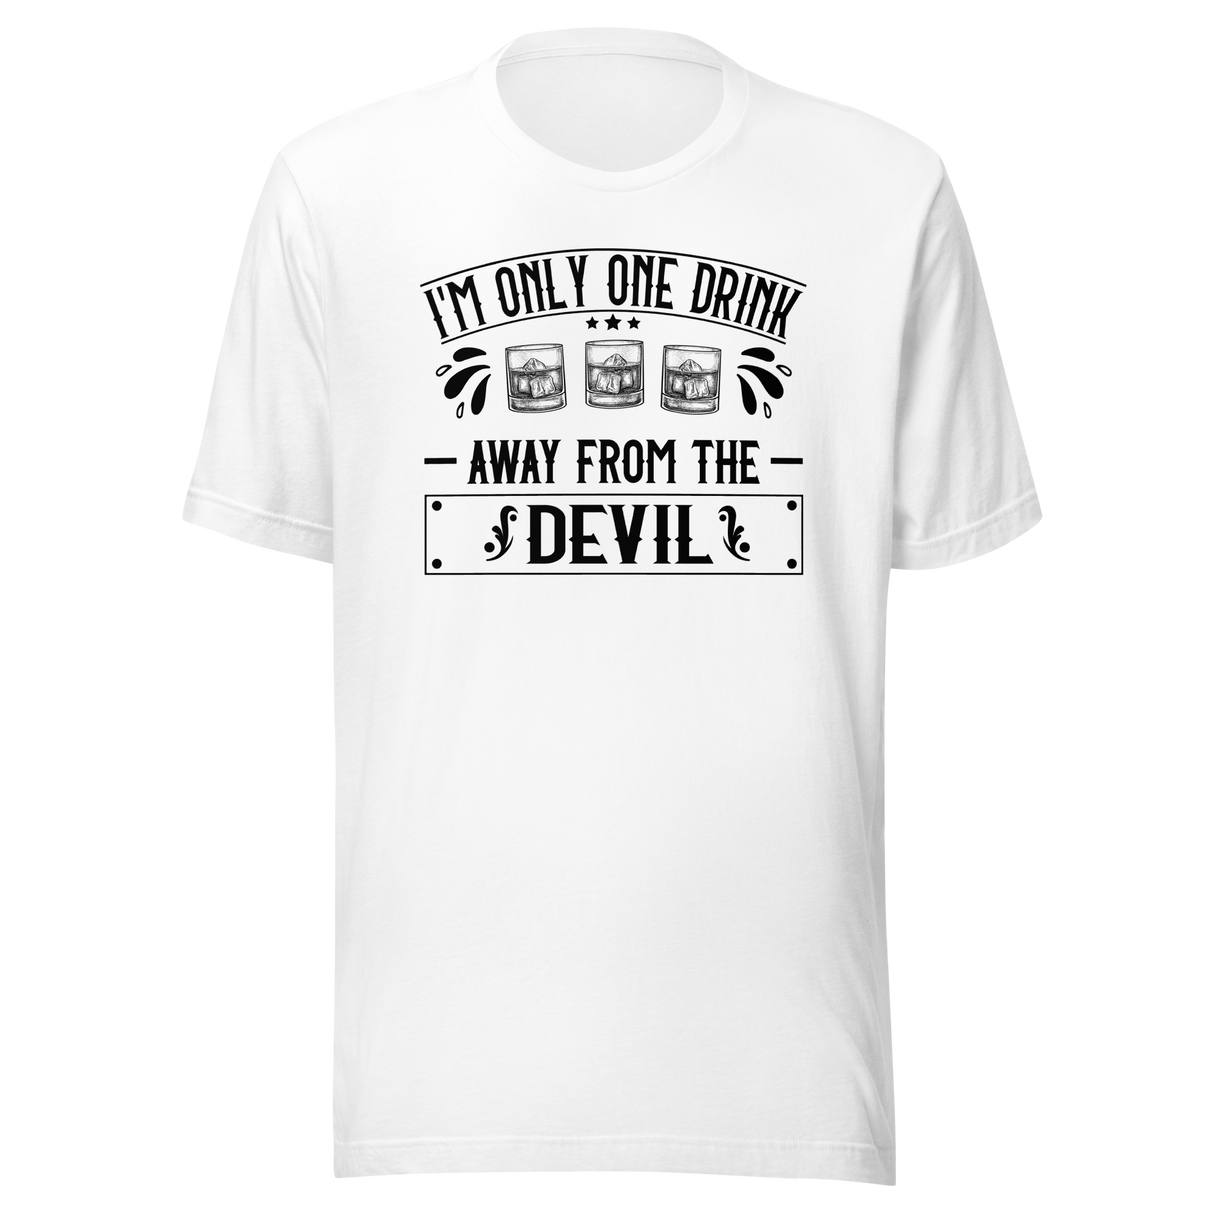 im-only-one-drink-away-from-the-devil-food-tee-life-t-shirt-sassy-tee-funny-t-shirt-quirky-tee#color_white